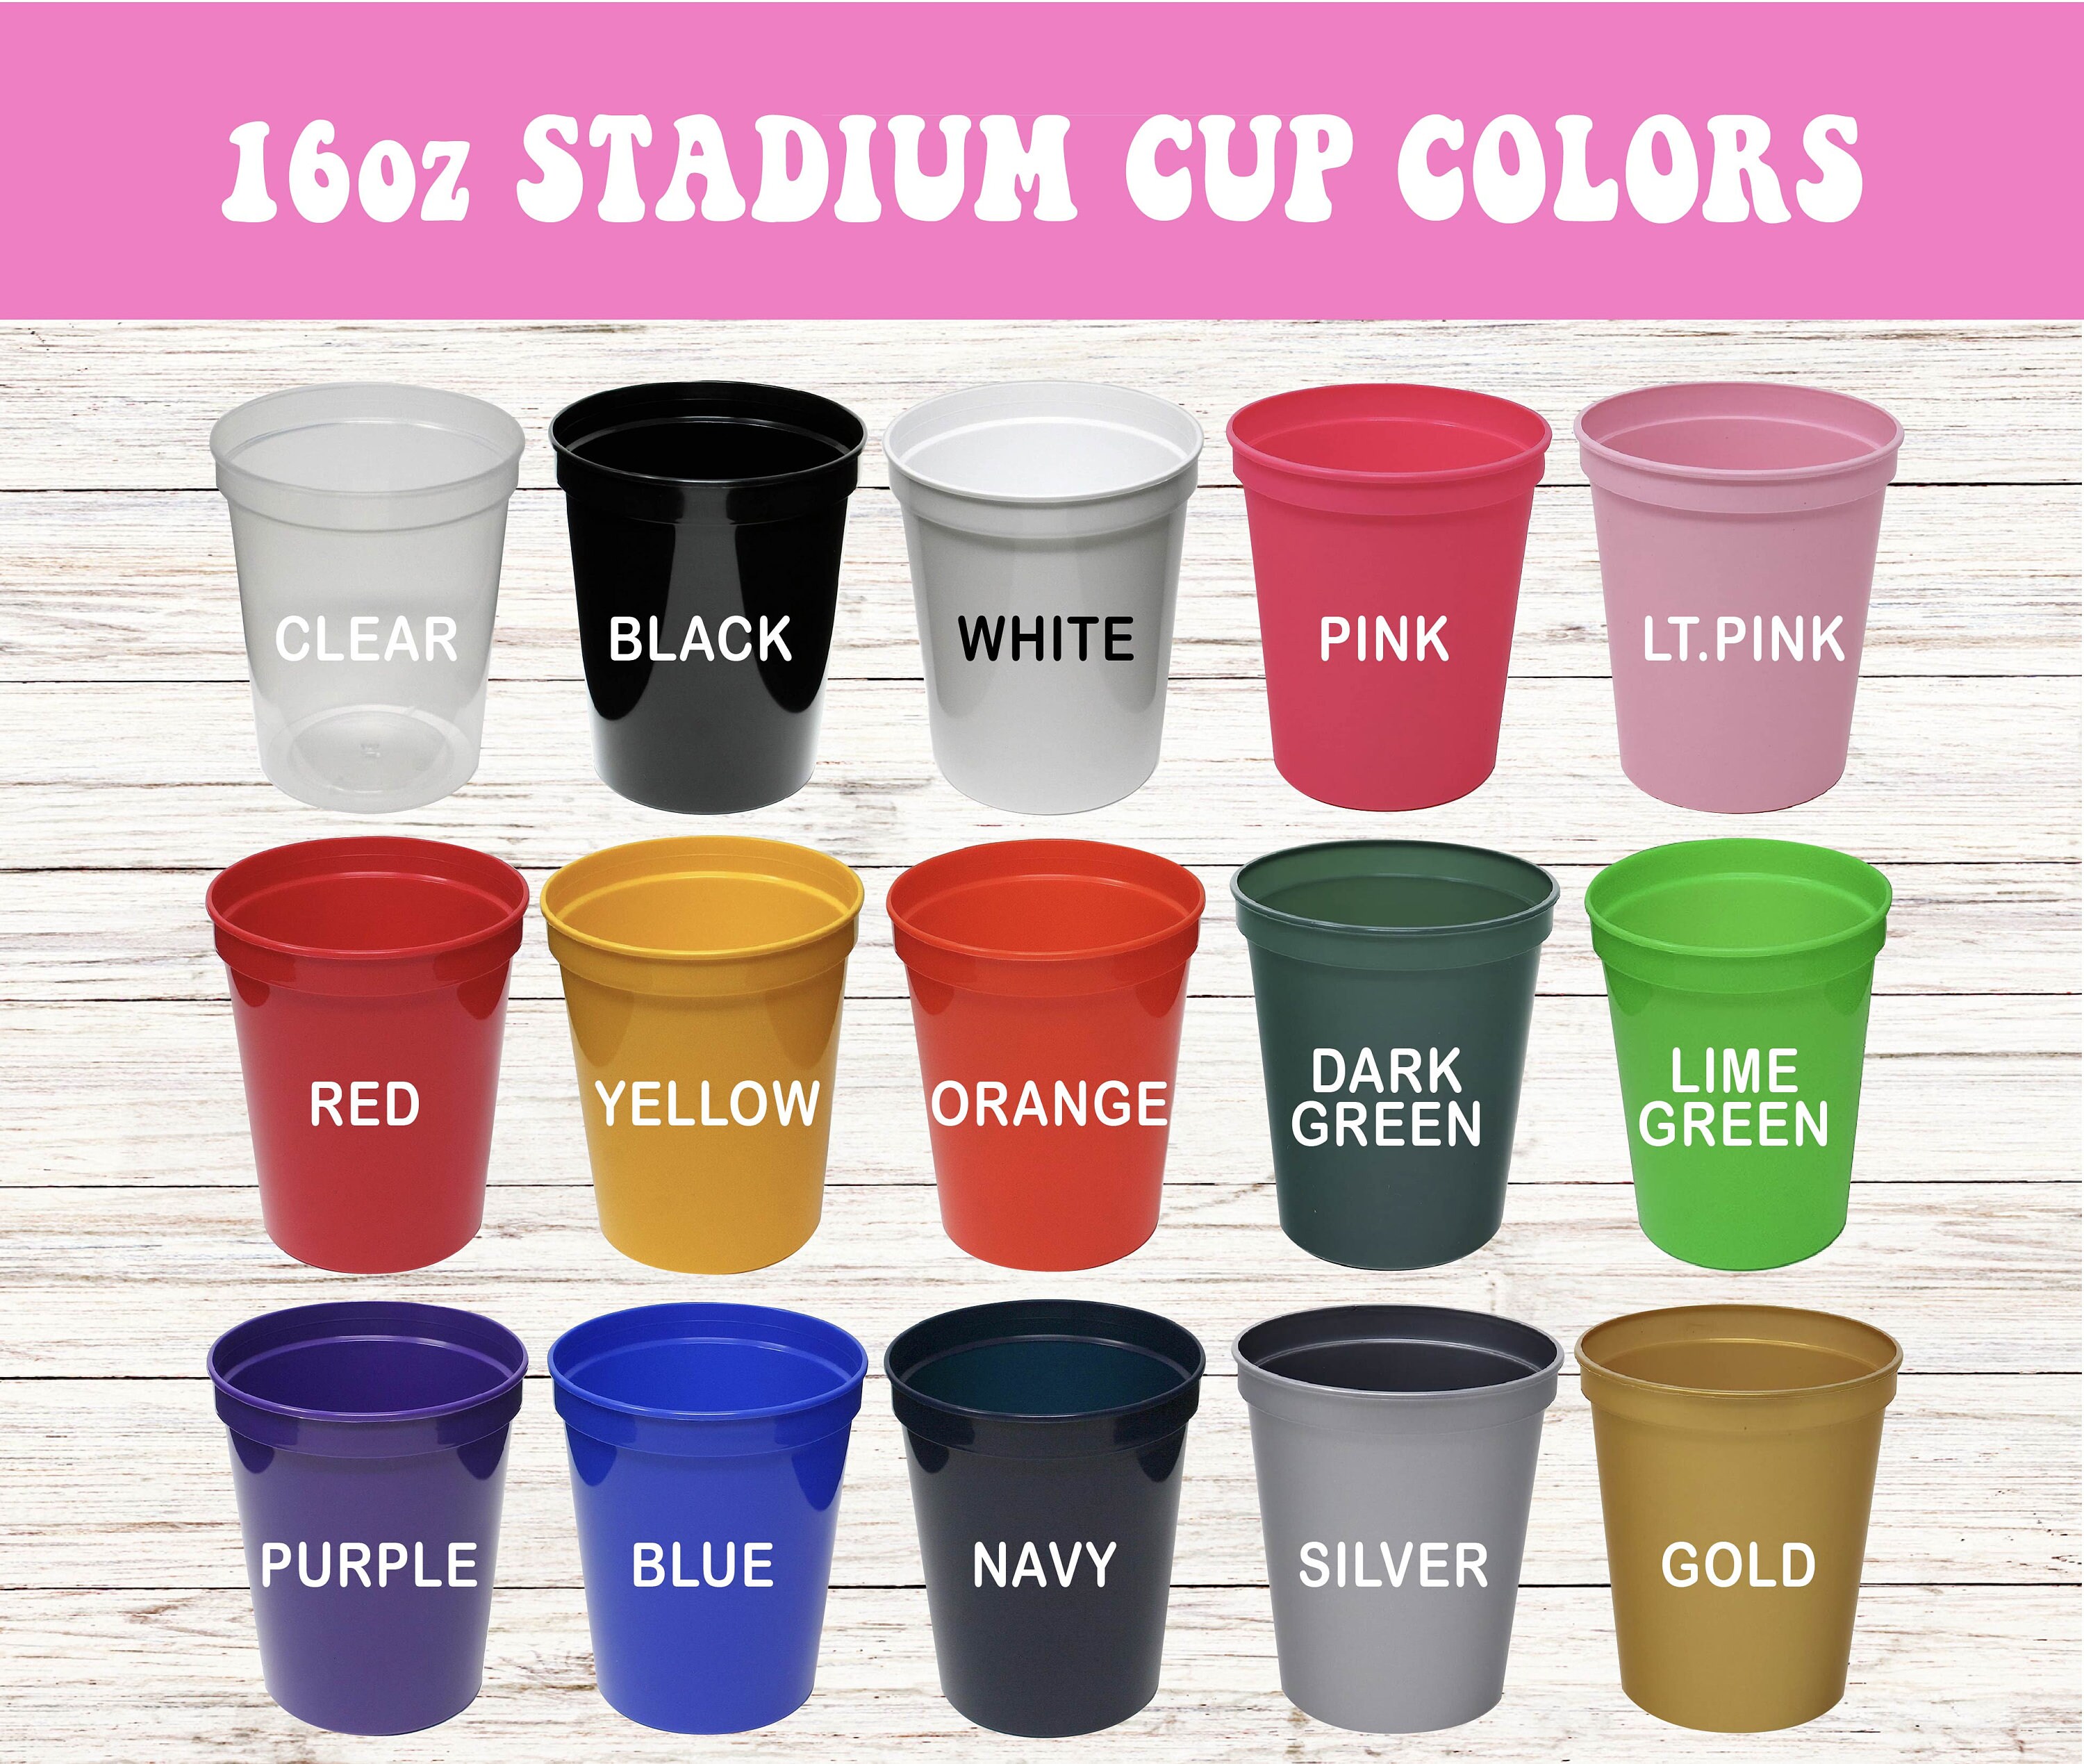 PREORDER: Holiday Stanley Cup Straw Cover 10mm – Kedziefest Parties